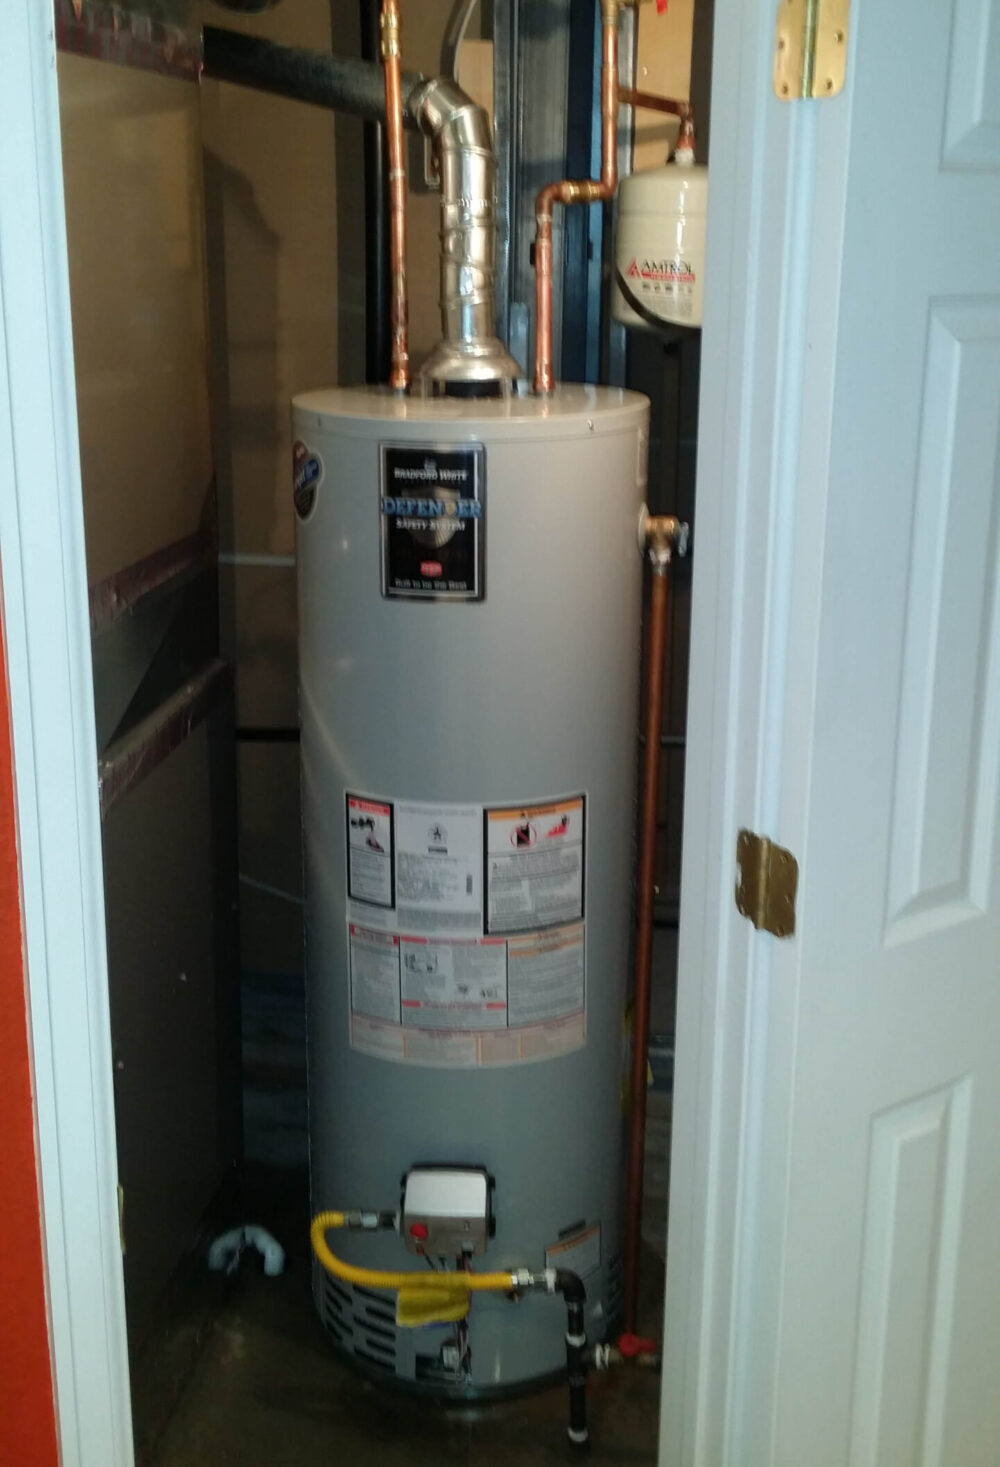 Bradford White water heater install with expan. tank